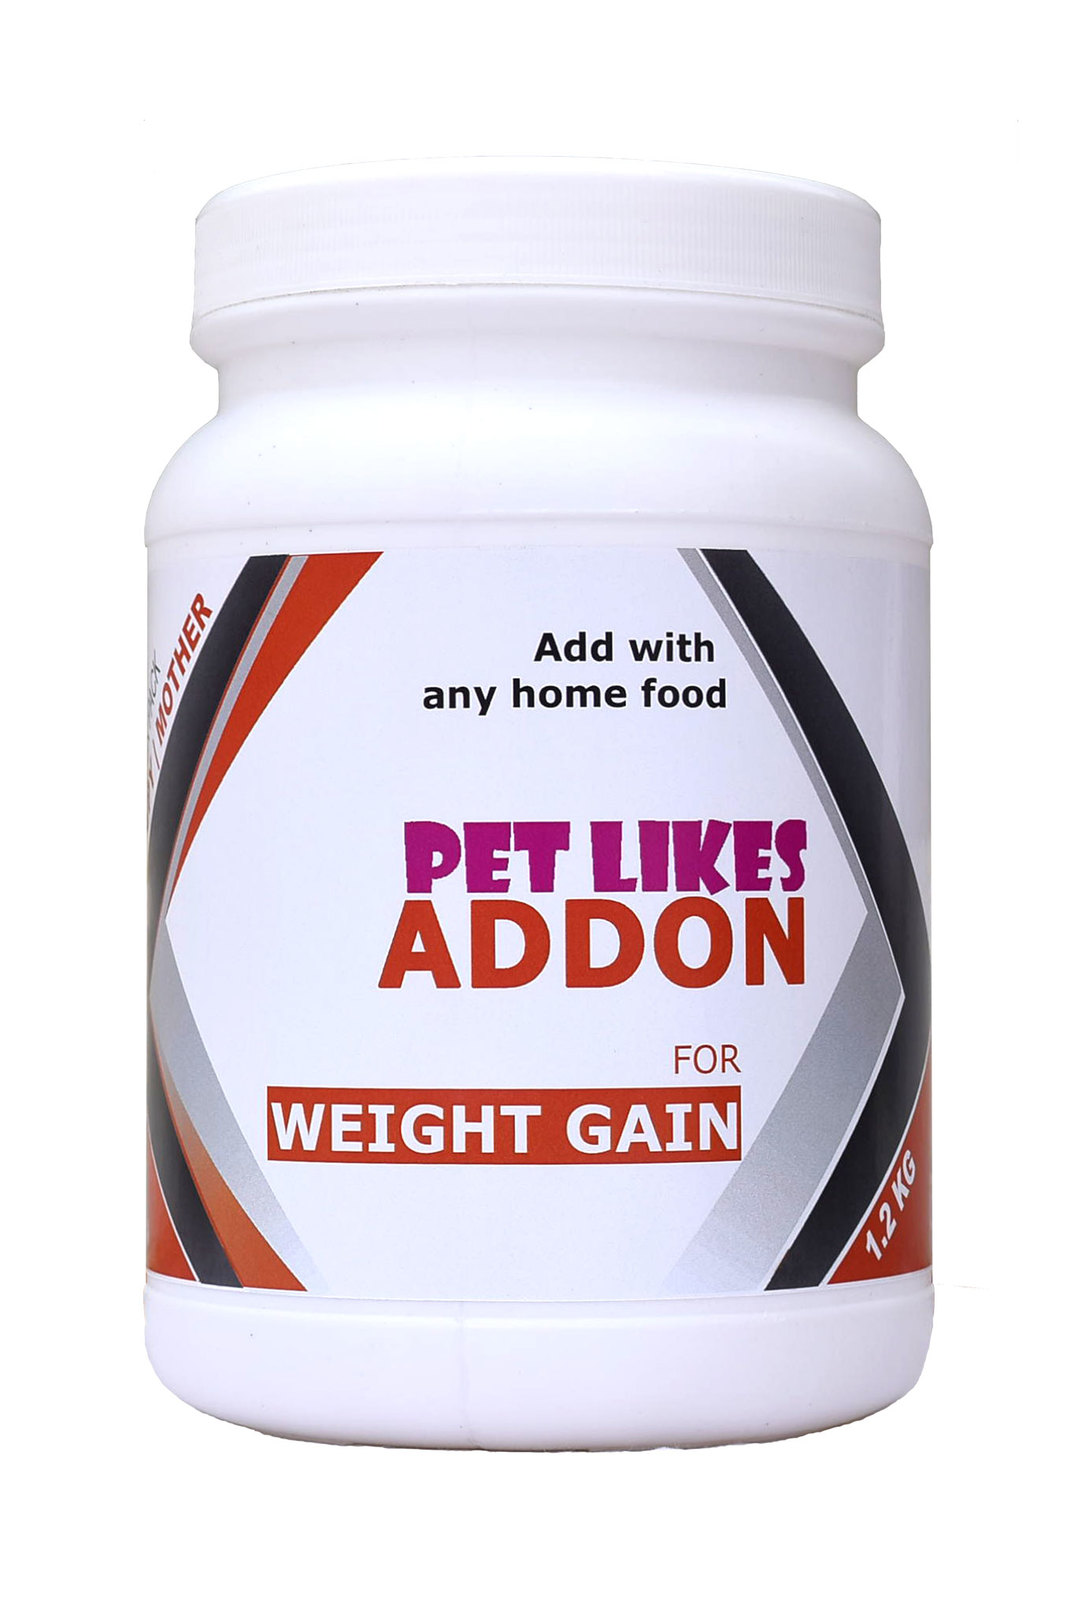 Pet Likes ADD ON Weight Gain – 1.2 Kg. The 3-Week Weight Gain Dog Food